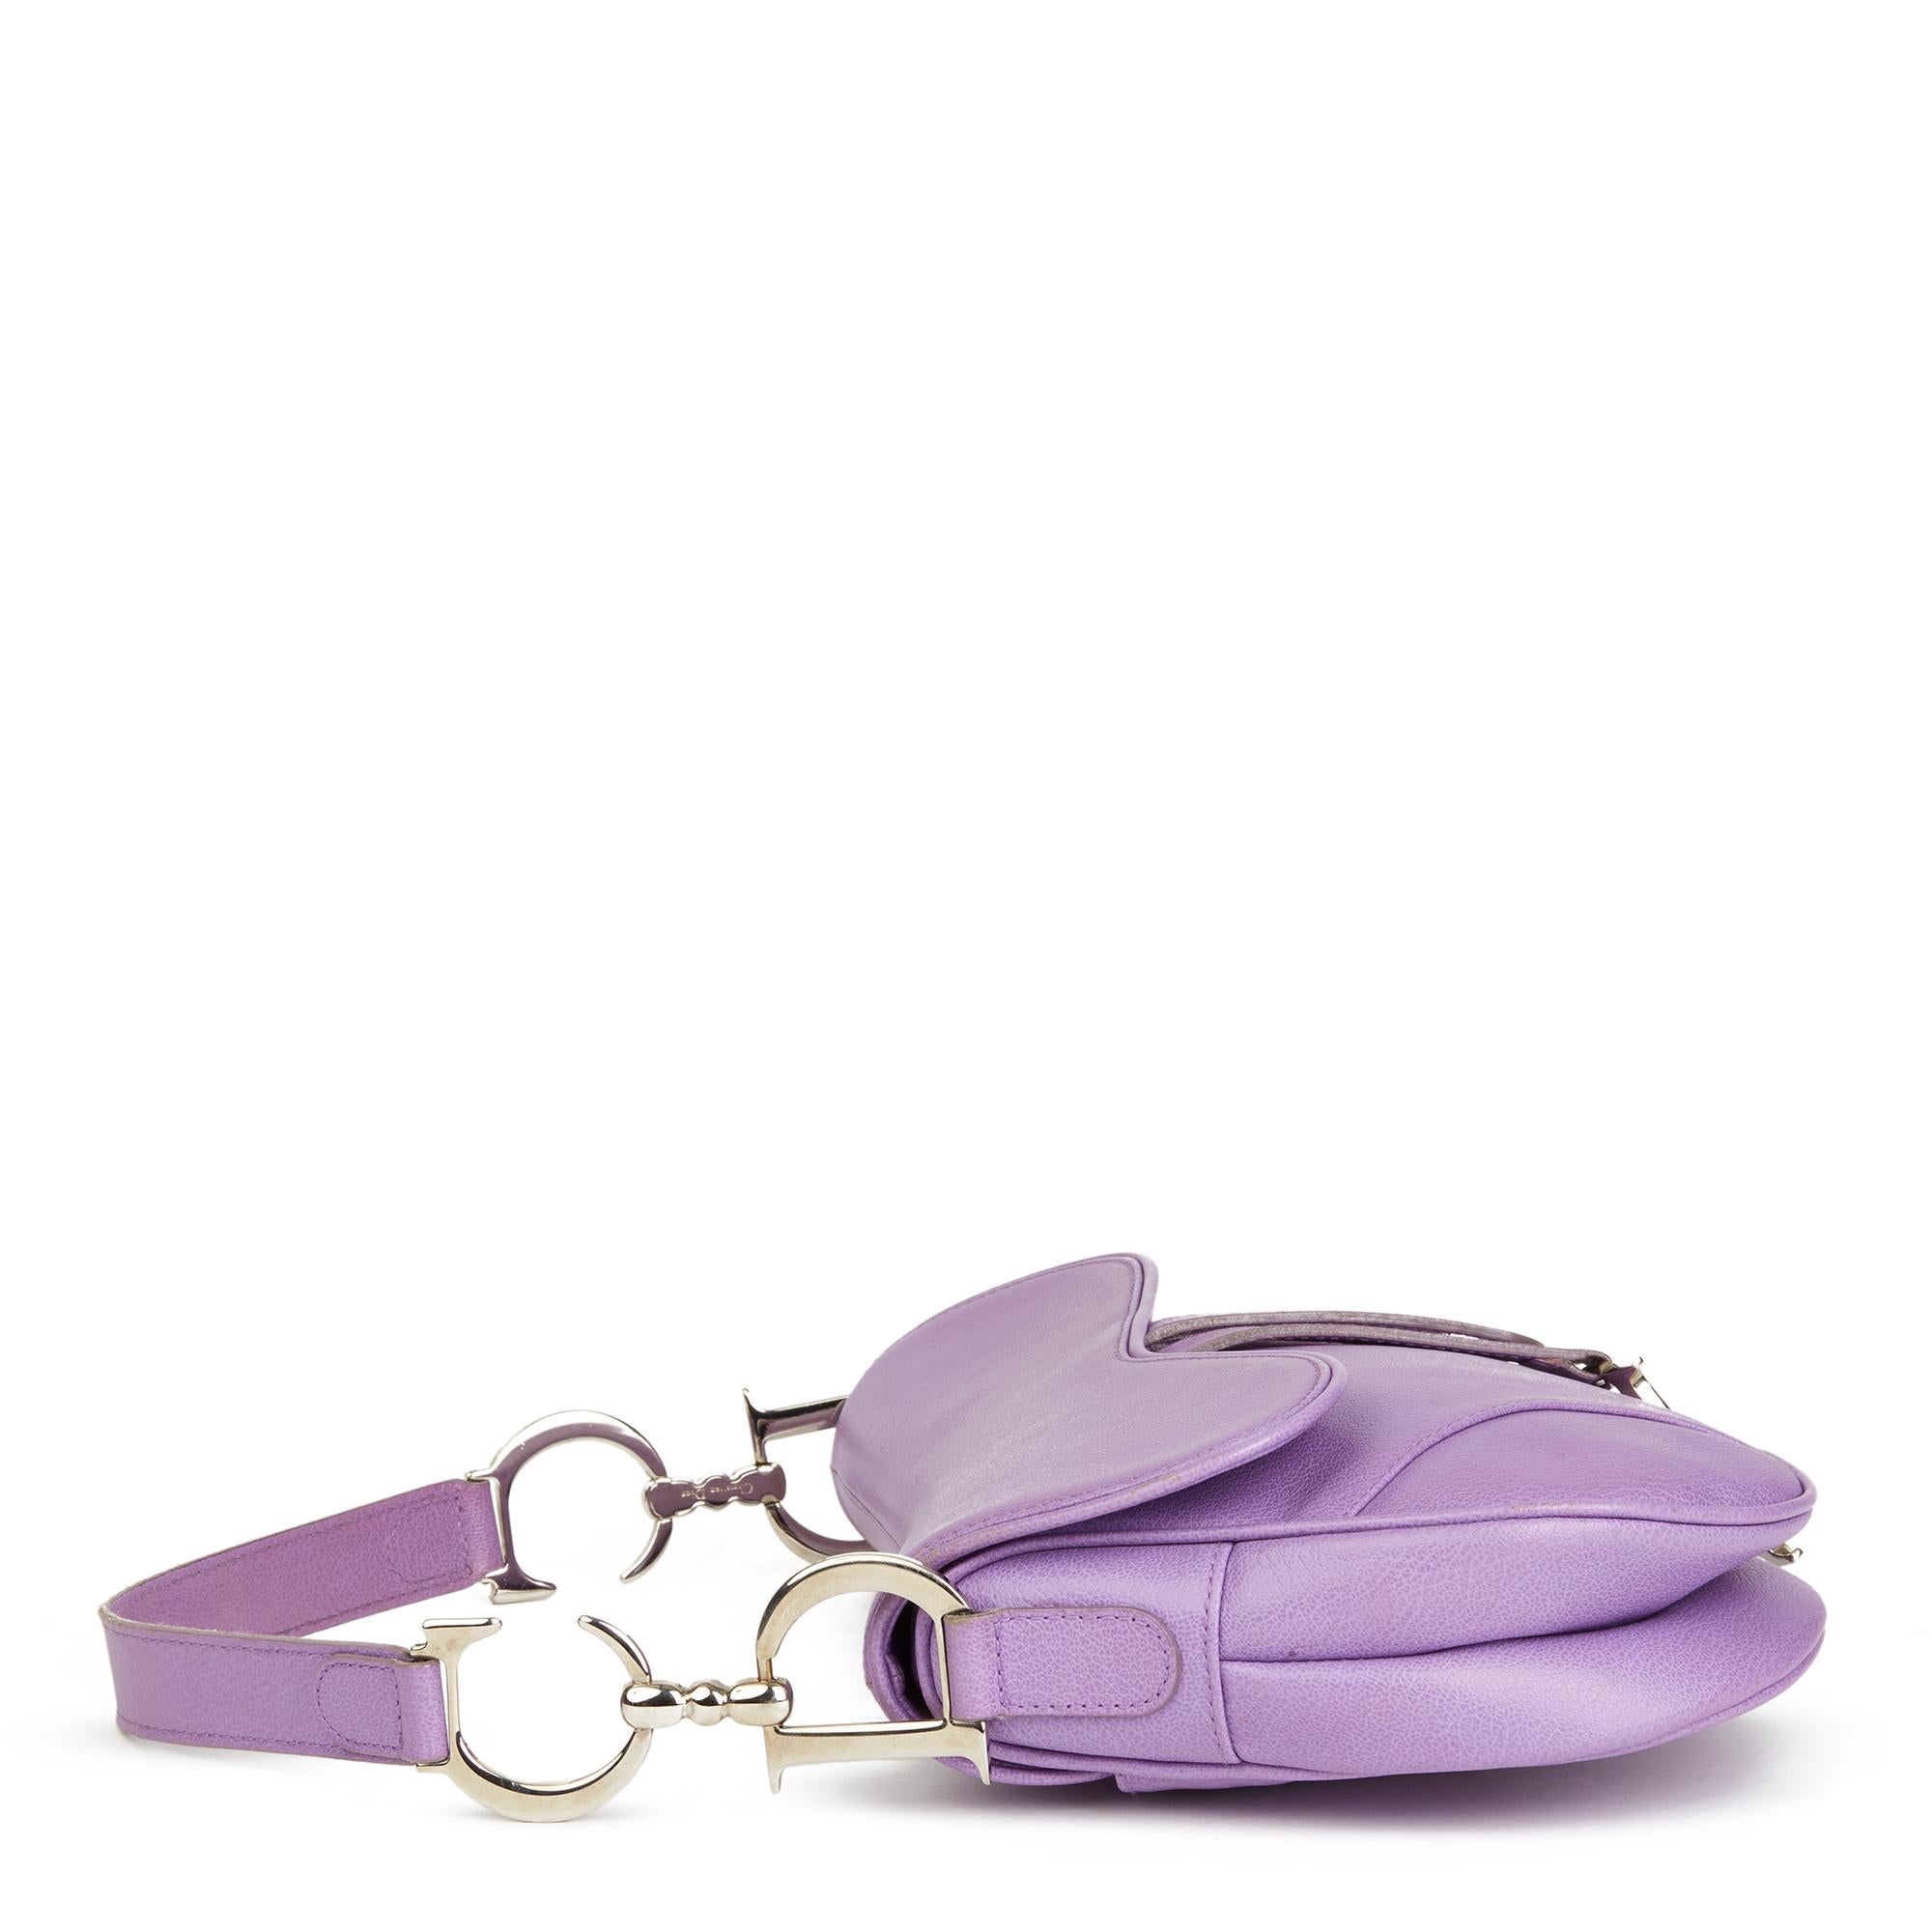 CHRISTIAN DIOR
Lilac Calfskin Leather Saddle Bag

Reference: HB2491
Serial Number: 06 RU 0064
Age (Circa): 2004
Accompanied By: Dior Dust Bag, Authenticity Card, Care Booklet
Authenticity Details: Date Stamp, Authenticity Card (Made in